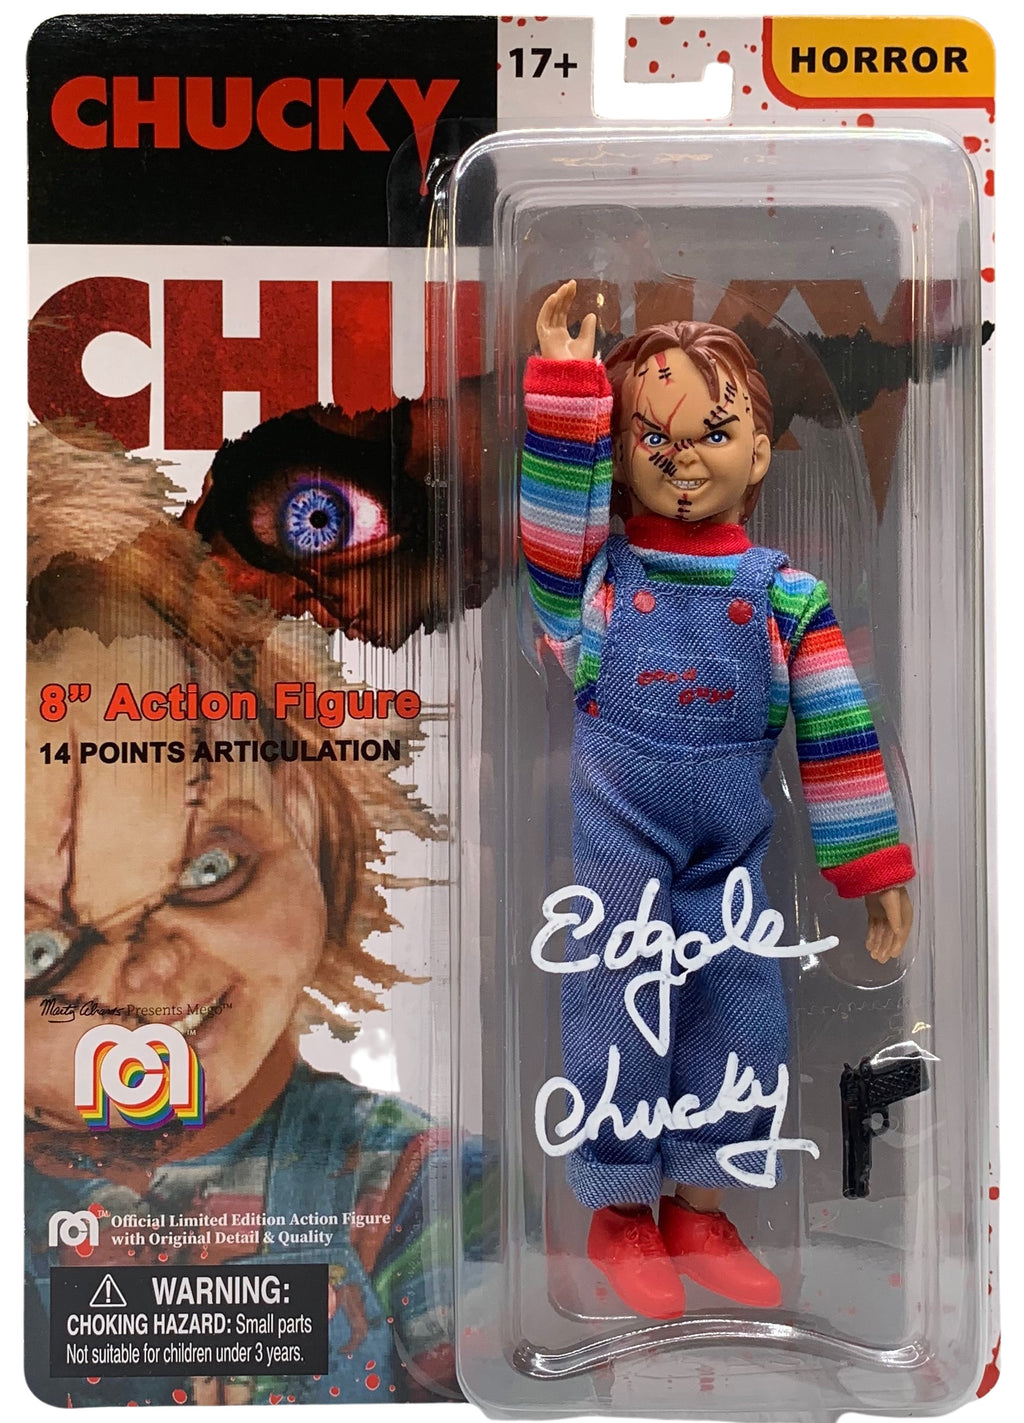 Ed Gale autographed signed inscribed Chucky Action Figure JSA COA